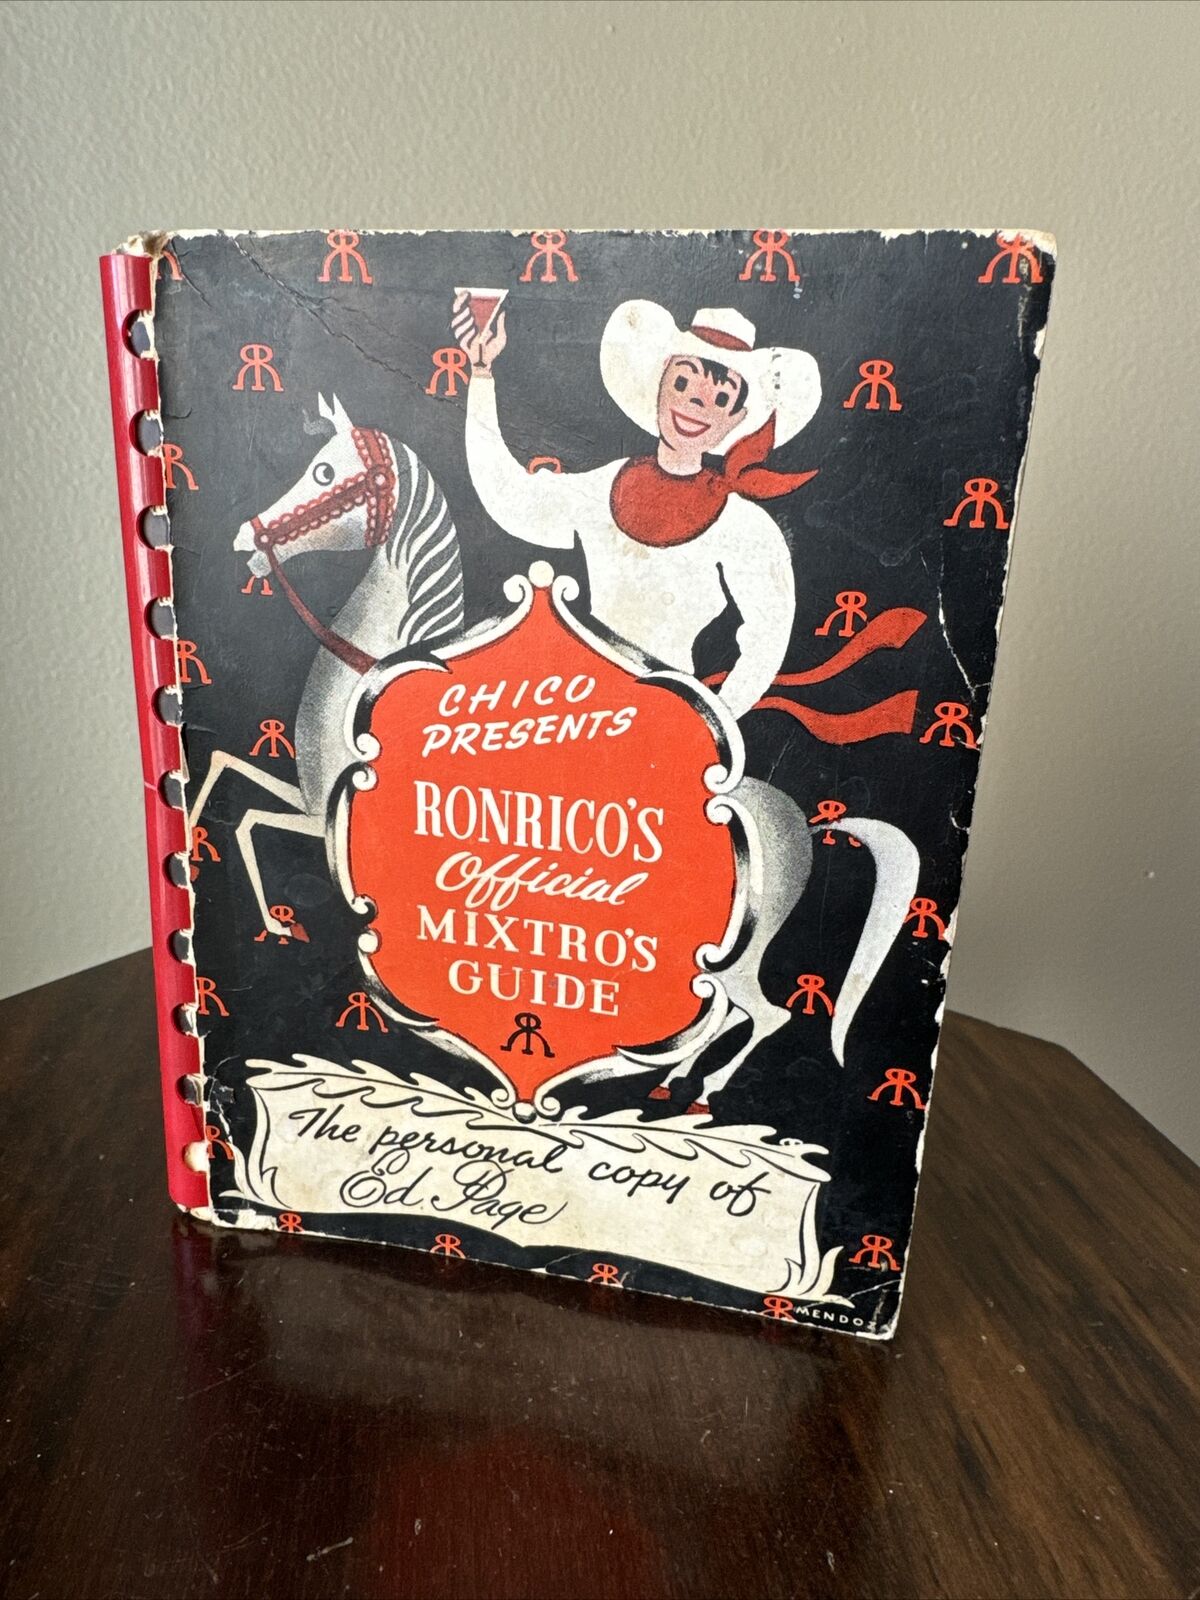 1950s Chico Presents Ronrico’s Rum Official Mixtros Bar Guide Cocktail Drinks